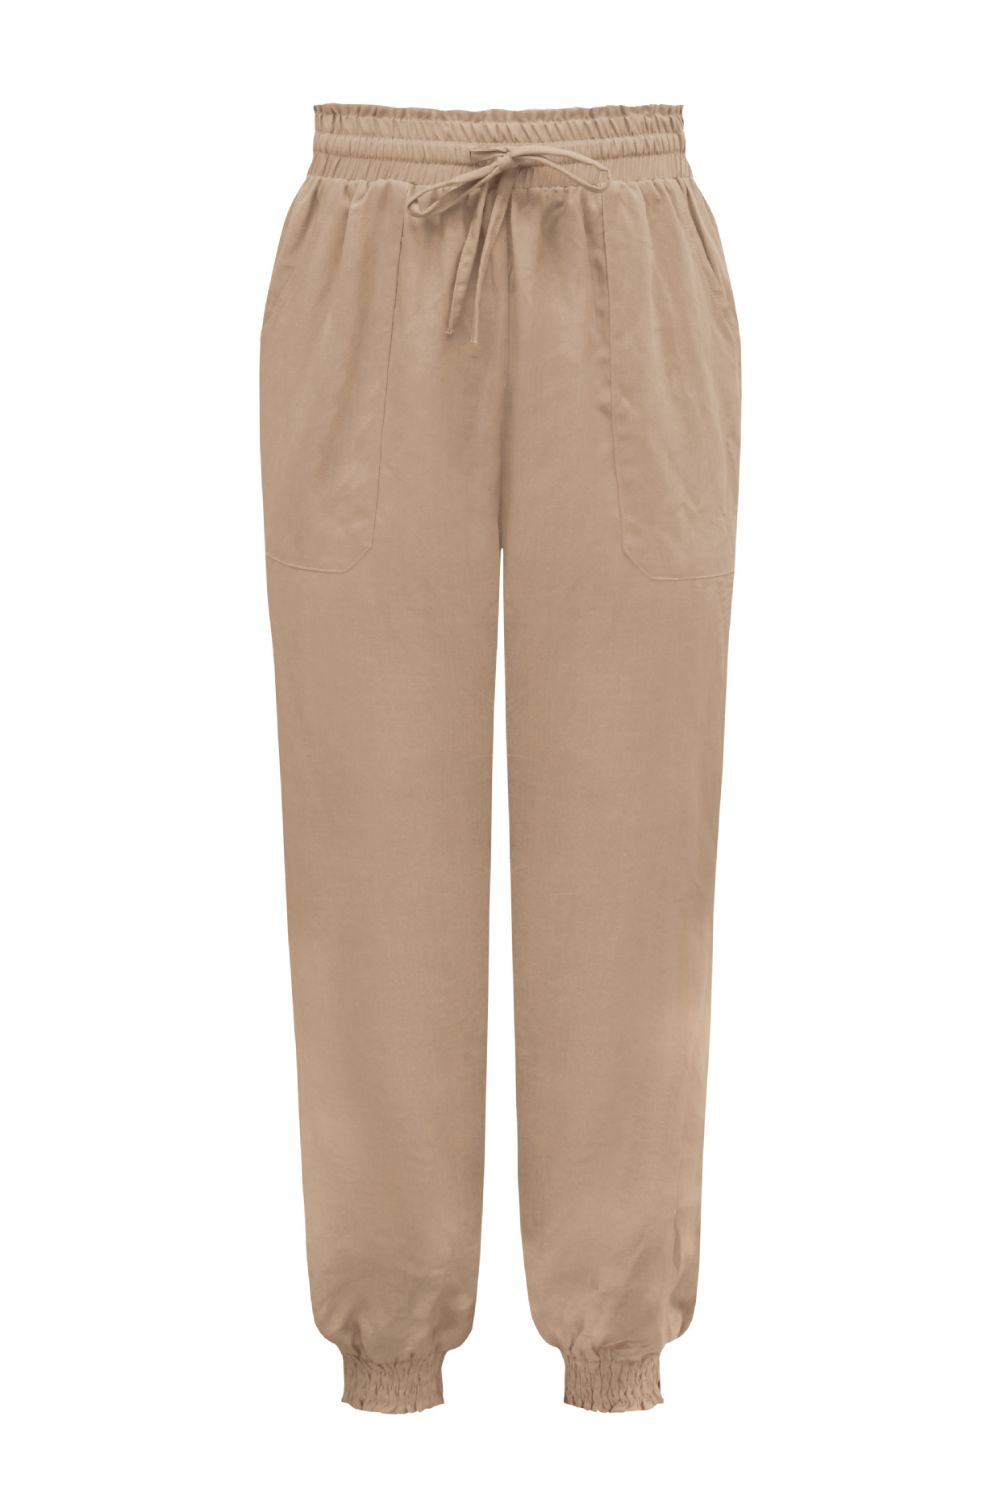 TAN Tied Long Joggers with Pockets - 5 colors - women's joggers at TFC&H Co.